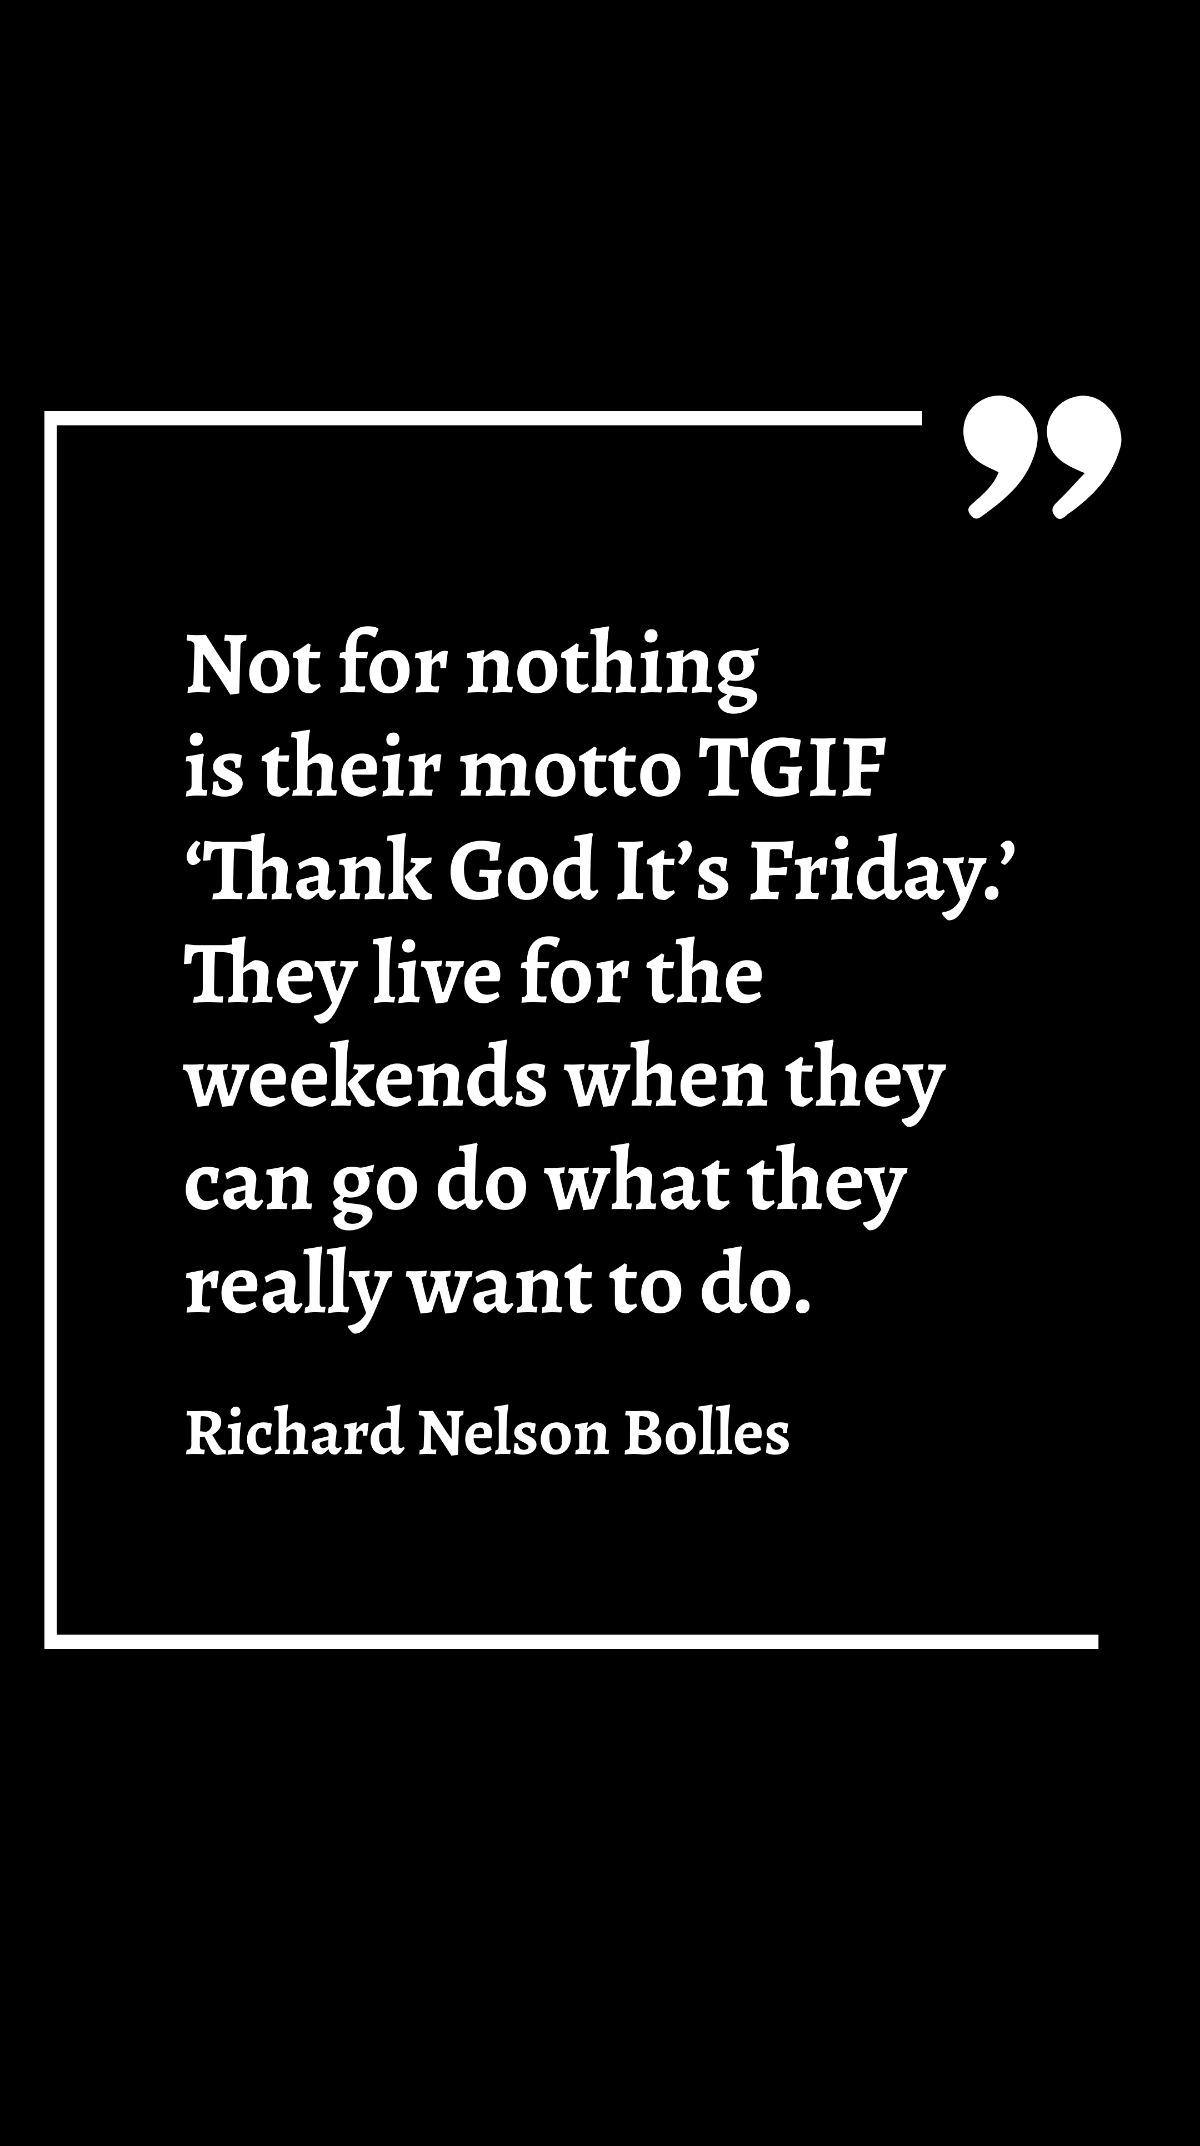 Richard Nelson Bolles - Not for nothing is their motto TGIF ‘Thank God It’s Friday.’ They live for the weekends when they can go do what they really want to do.